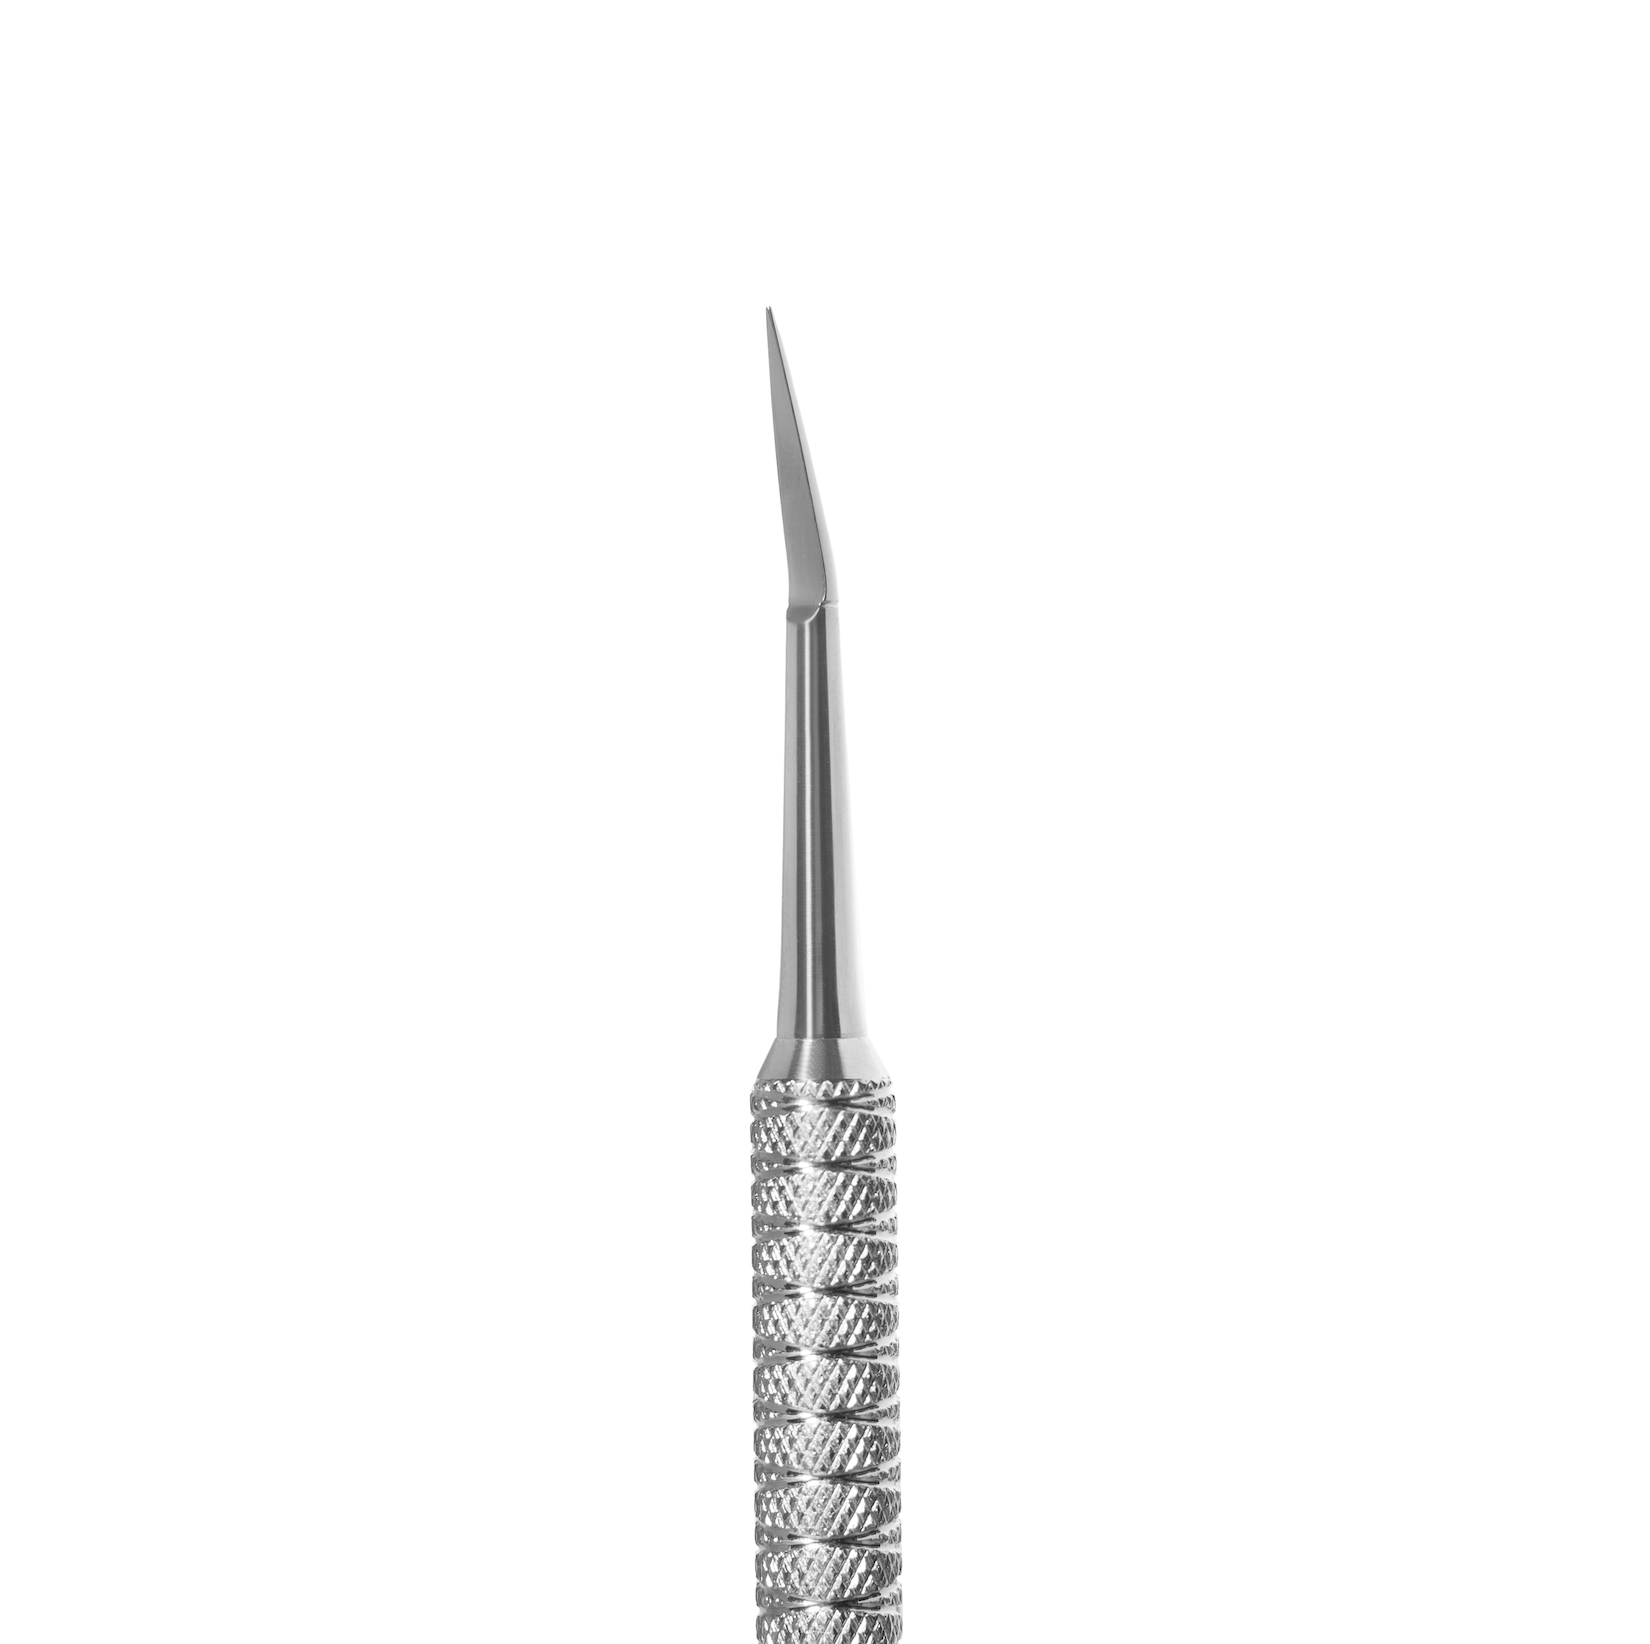 Staleks Pedicure pusher tool EXPERT 20 TYPE 1 (hemisphere curette and cleaner) - F.O.X Nails USA